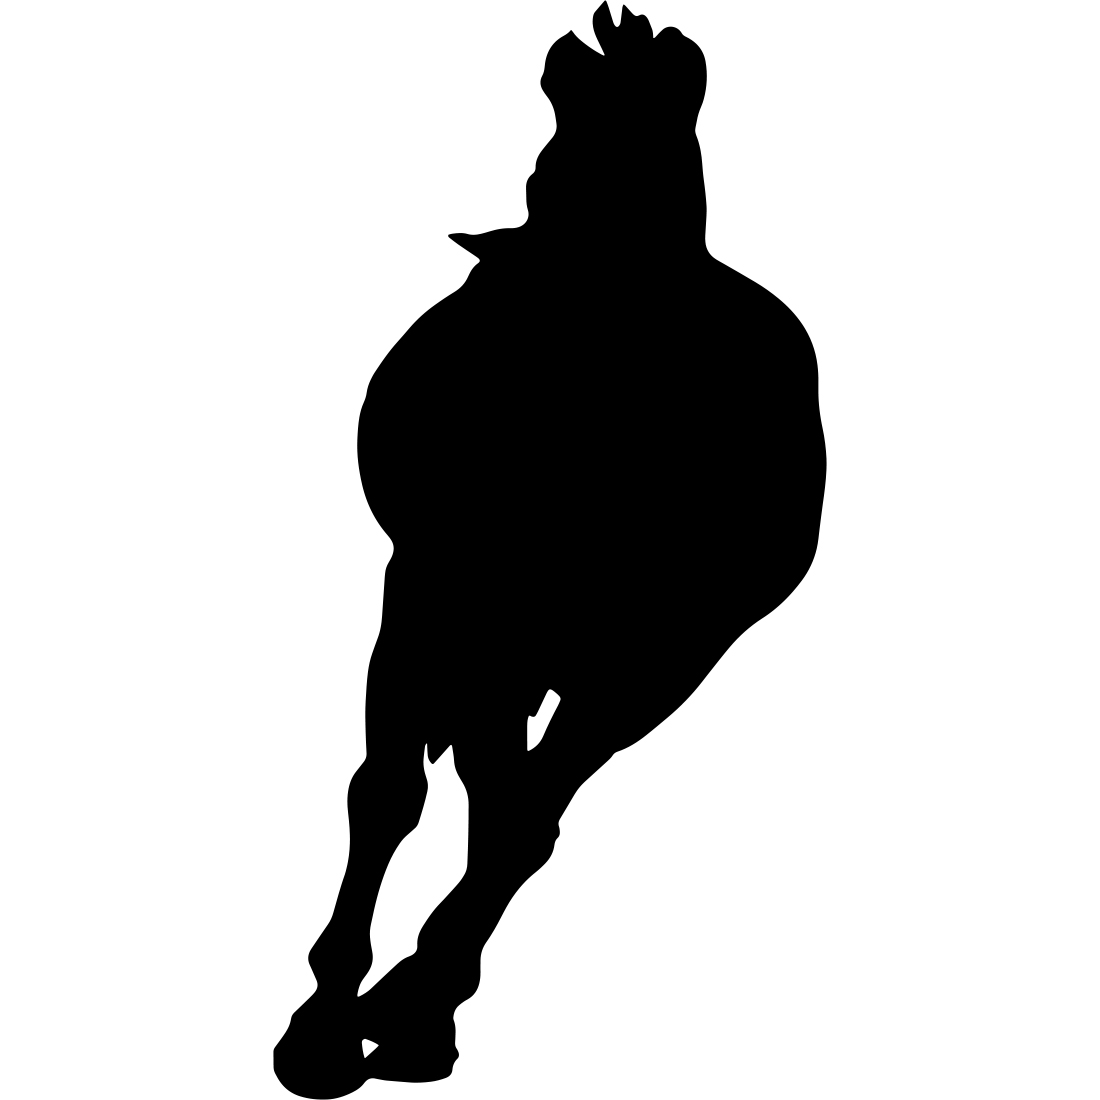 Black and white silhouette of a horse.